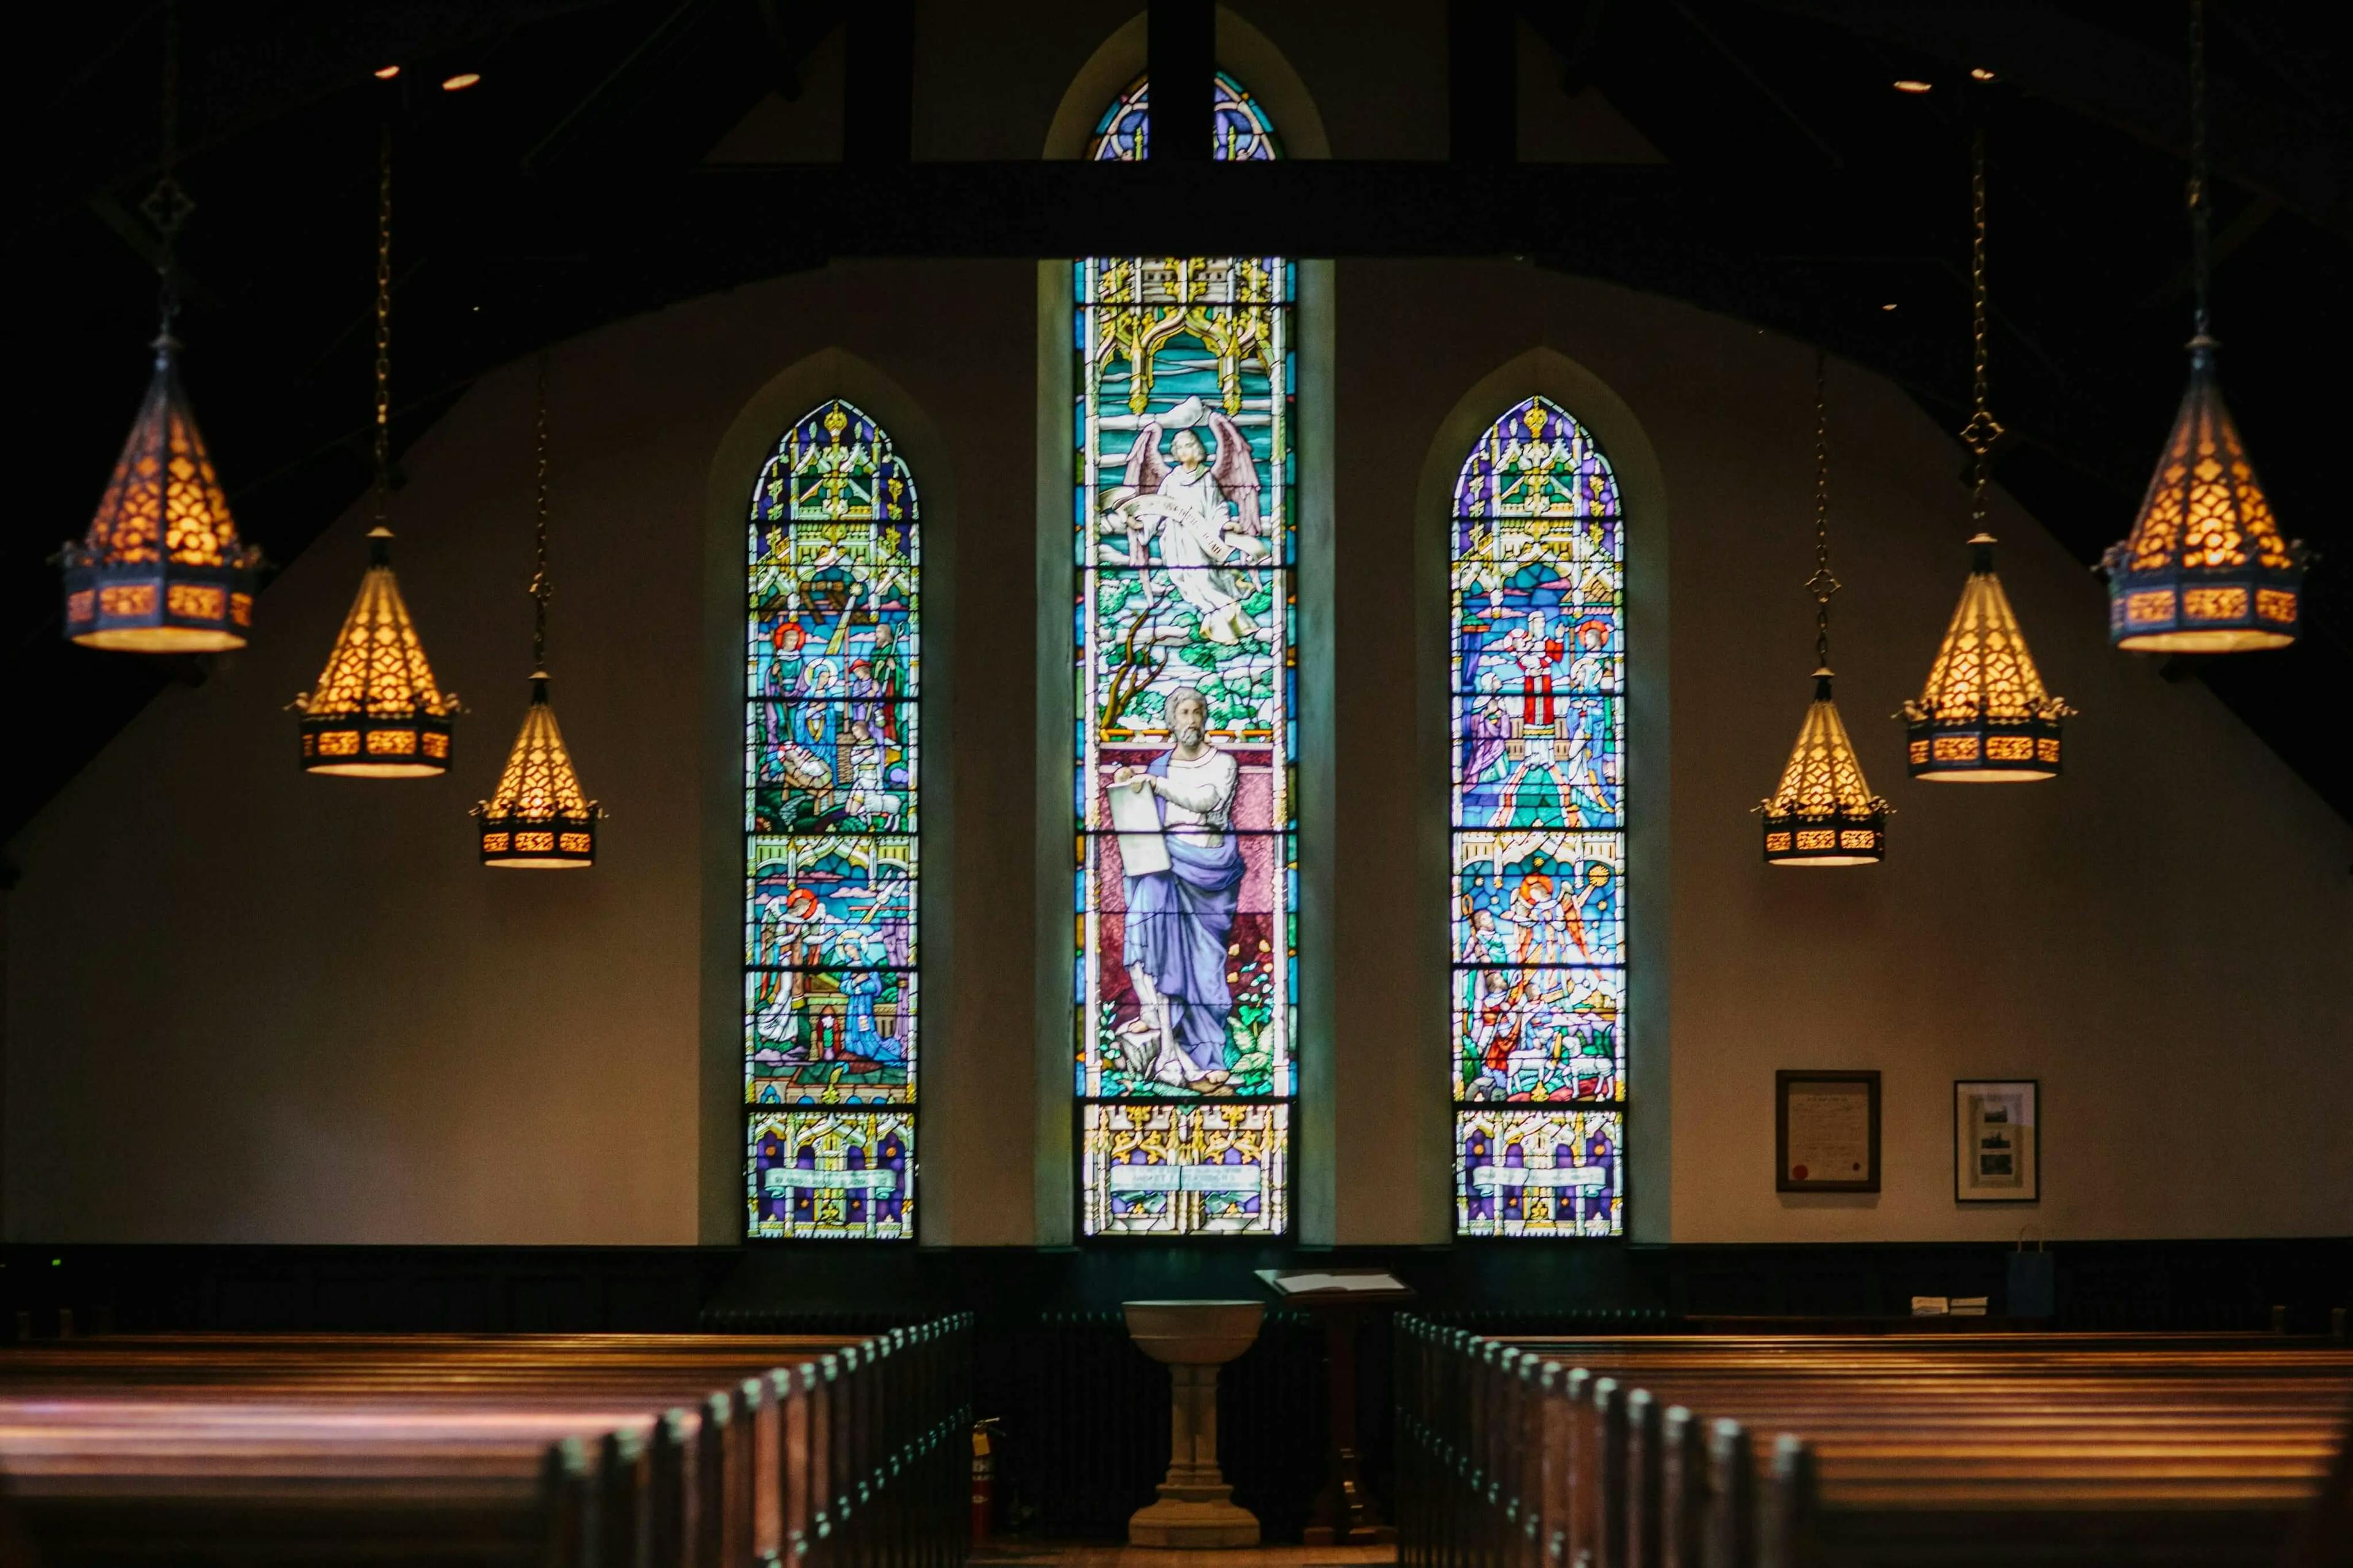 A church interior showcasing a beautiful stained glass window.